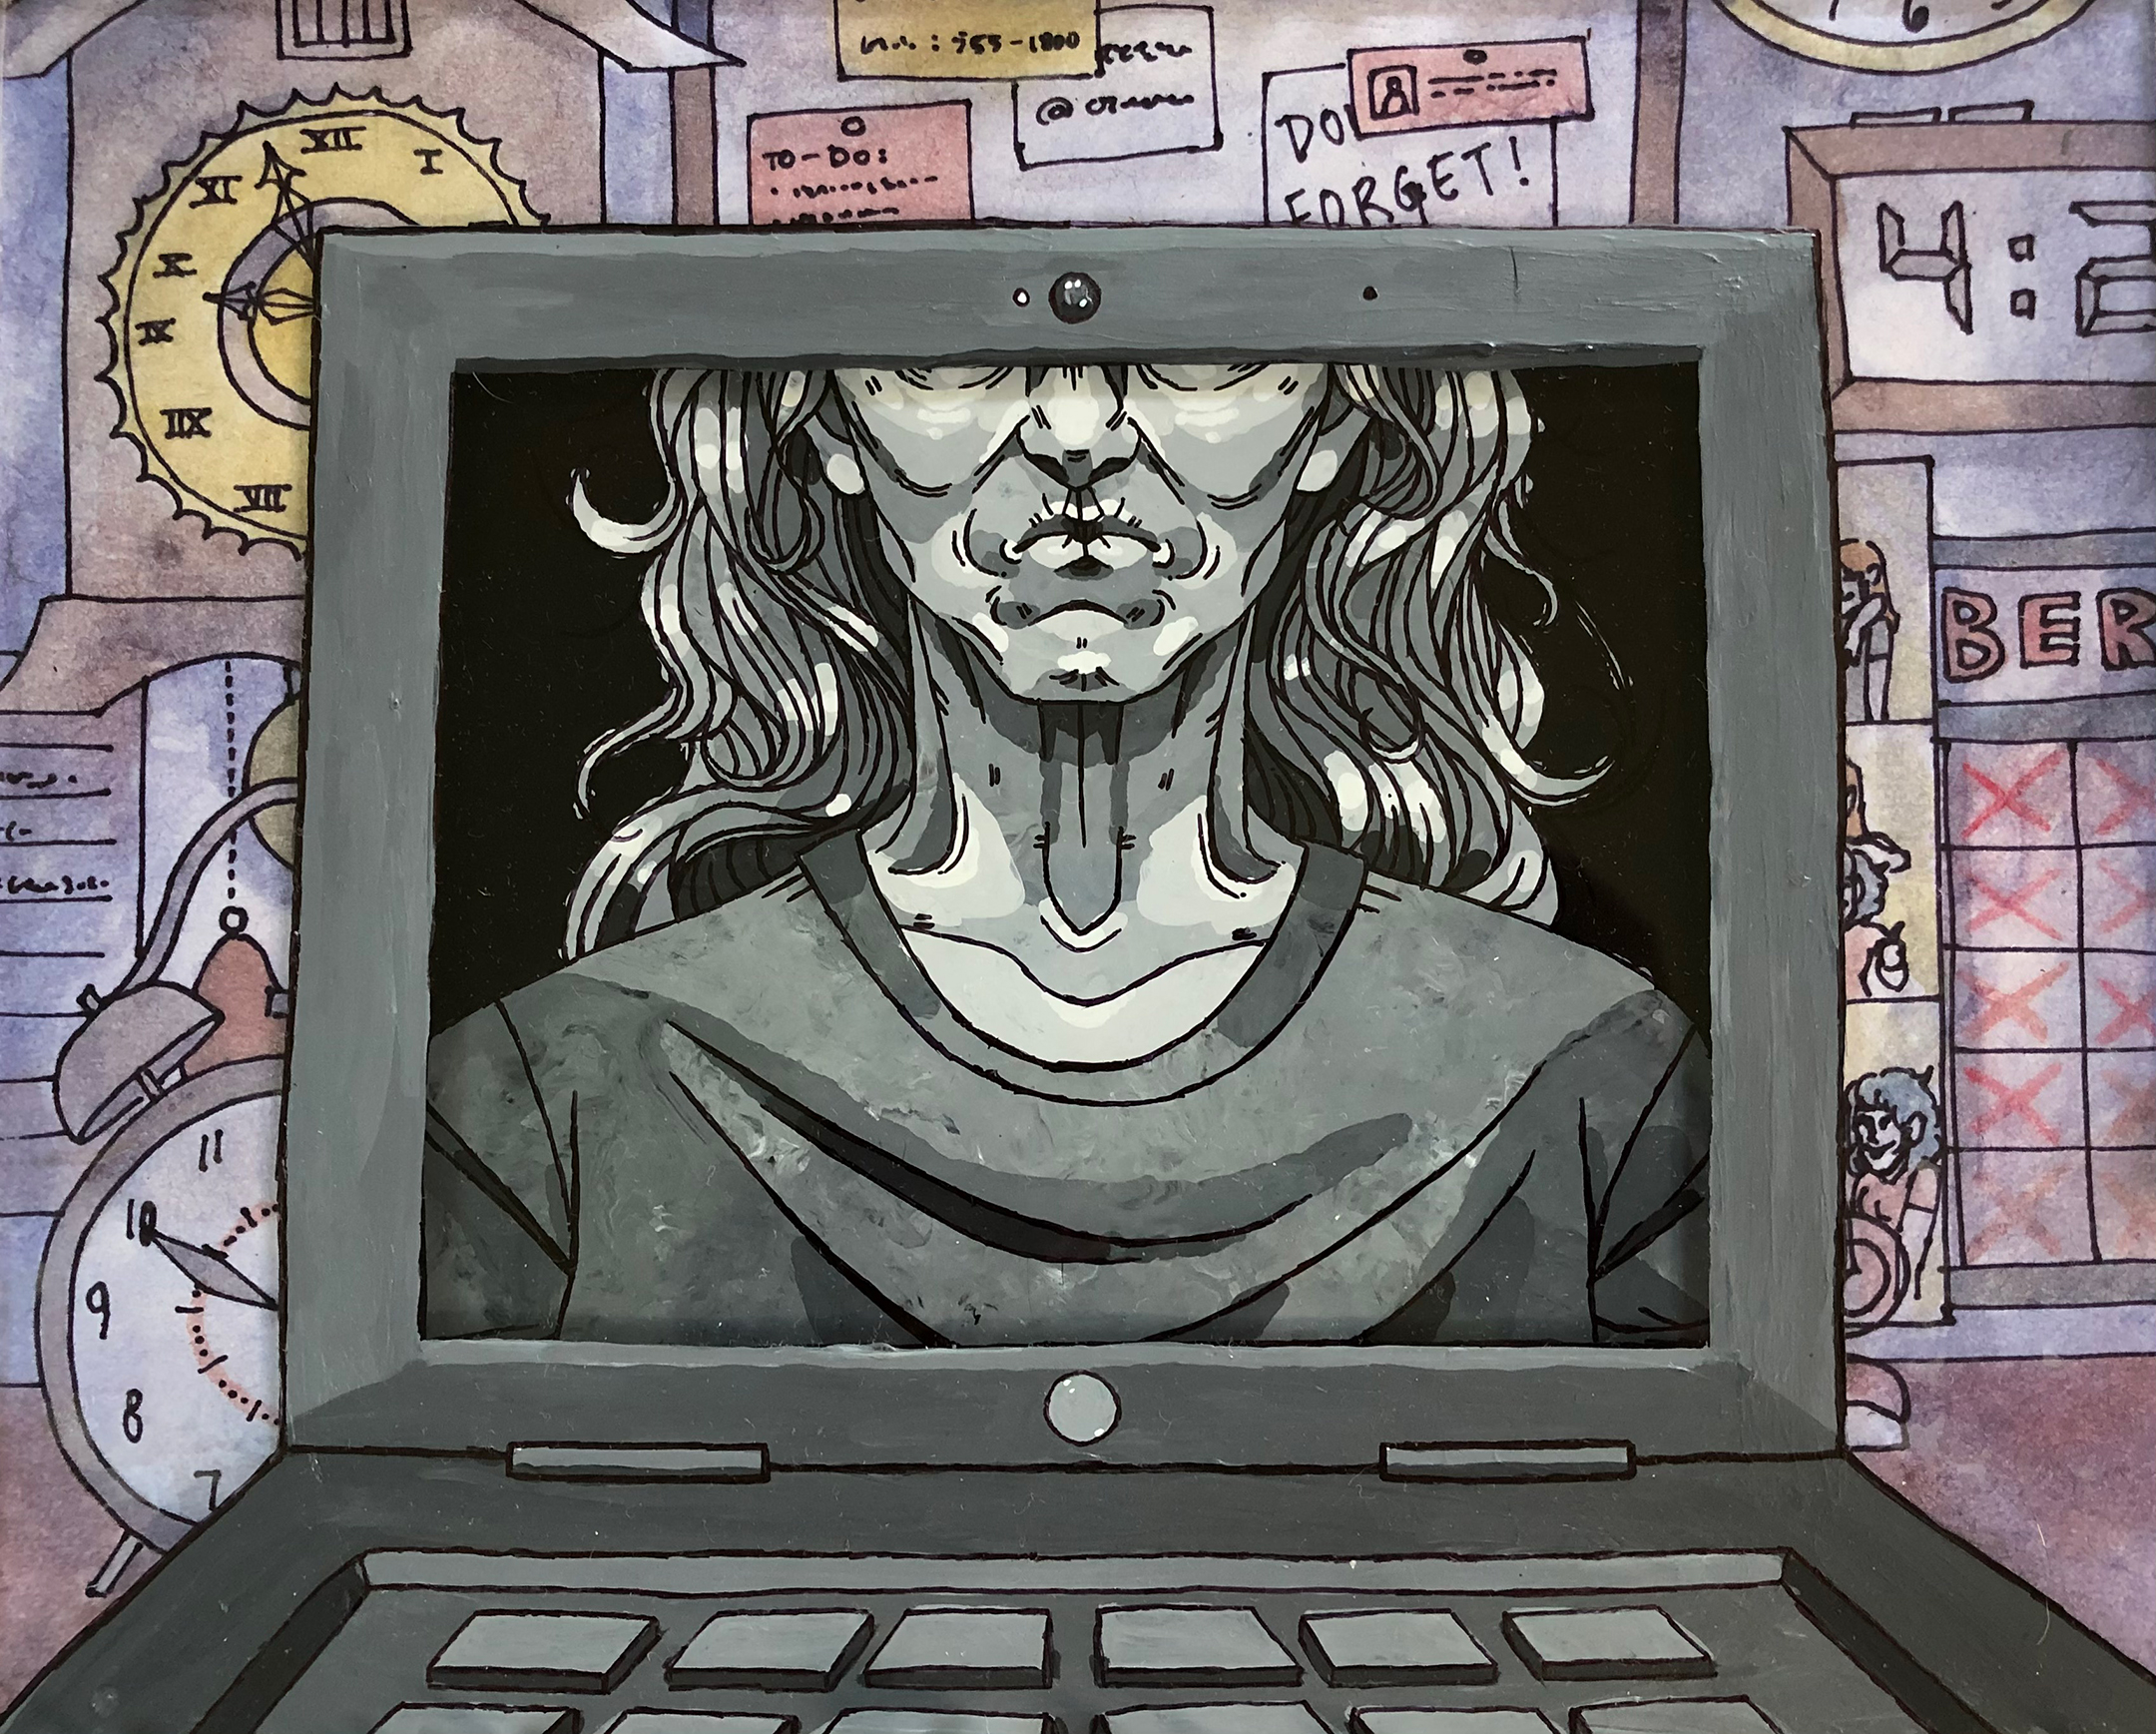 Black and illustration of a woman seen from the bottom of her eyes to her mid-chest, set into a gray laptop screen against a background of lilac clocks and calendars